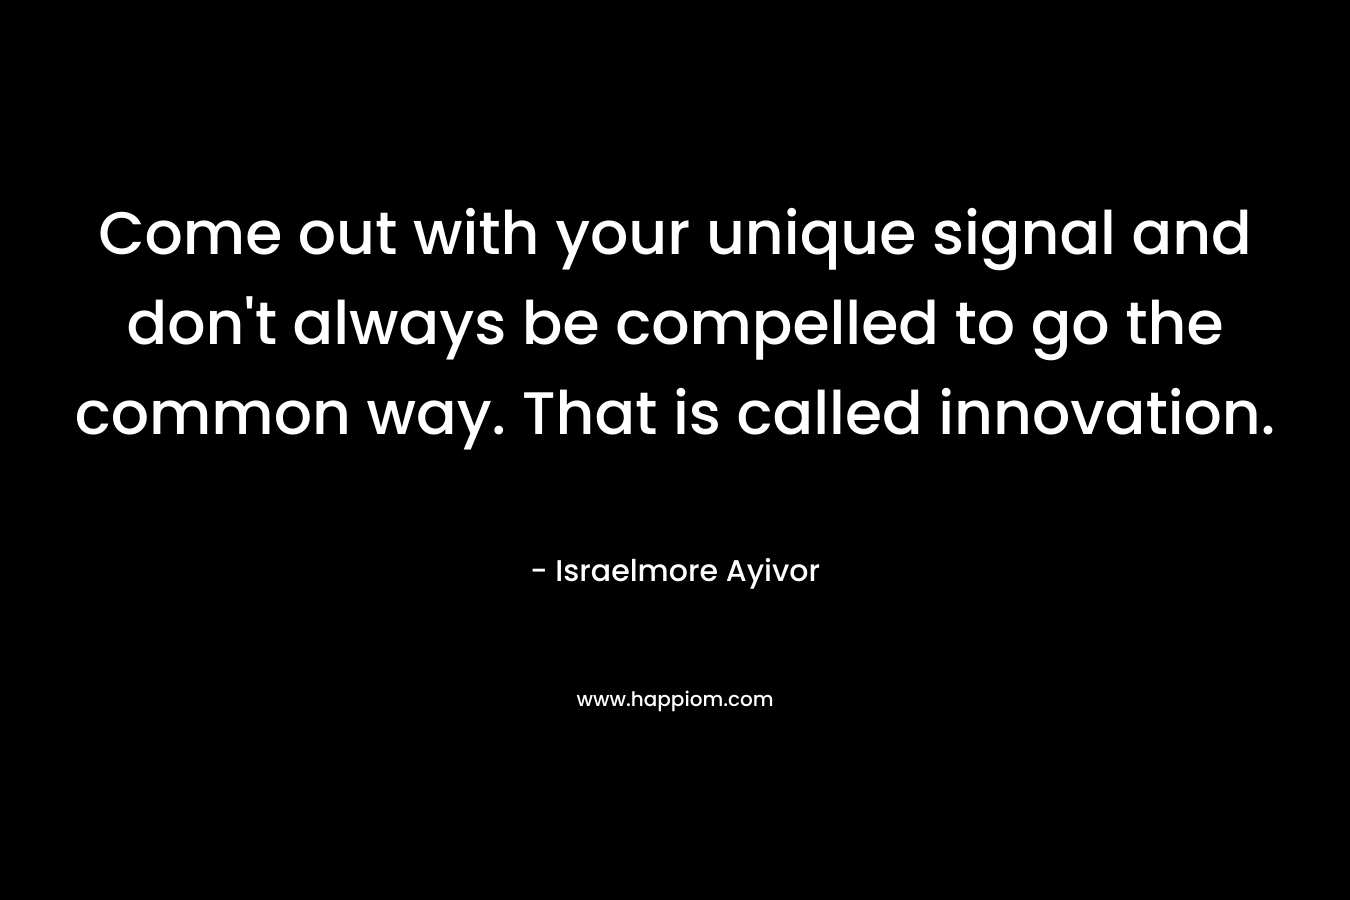 Come out with your unique signal and don’t always be compelled to go the common way. That is called innovation. – Israelmore Ayivor